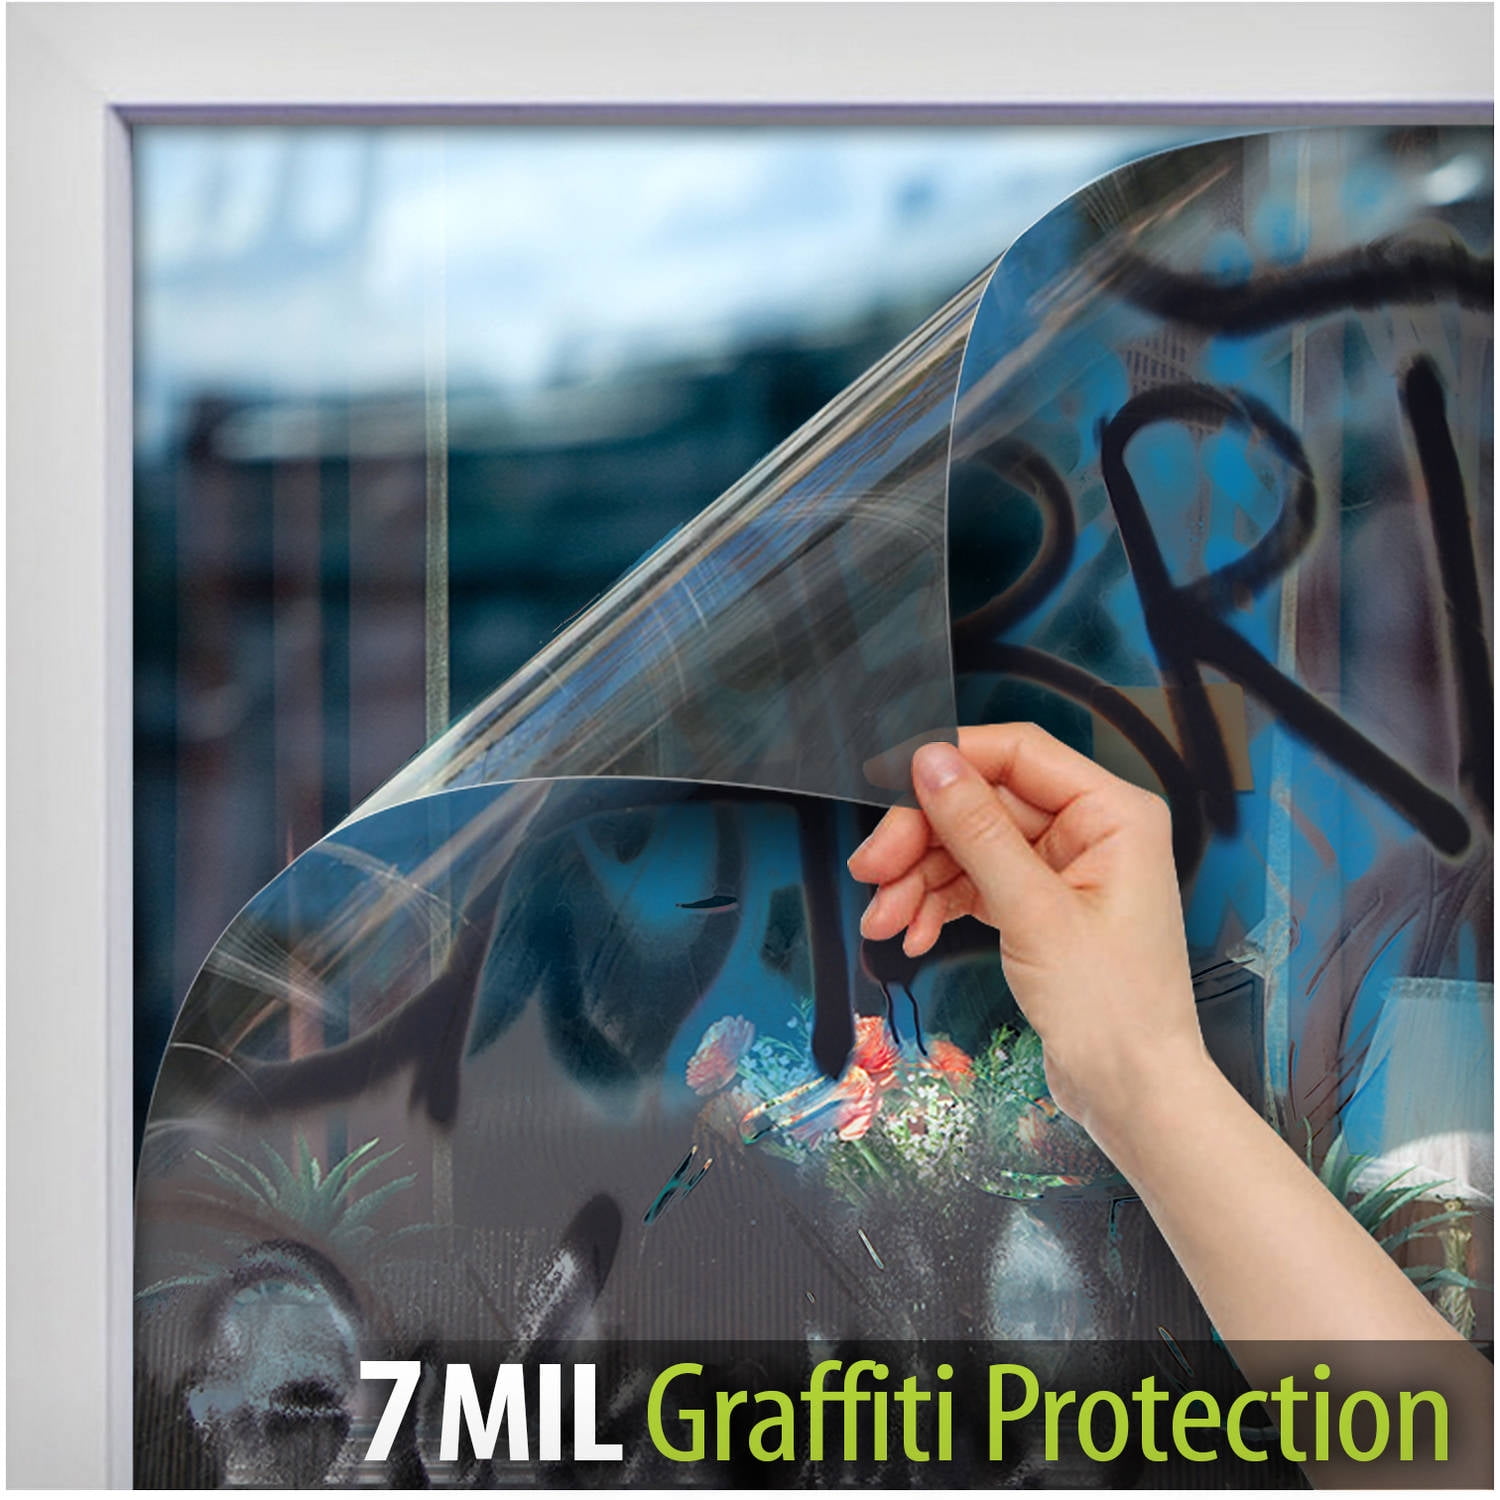 4 mil. -- Safety Window Film with UV Protection